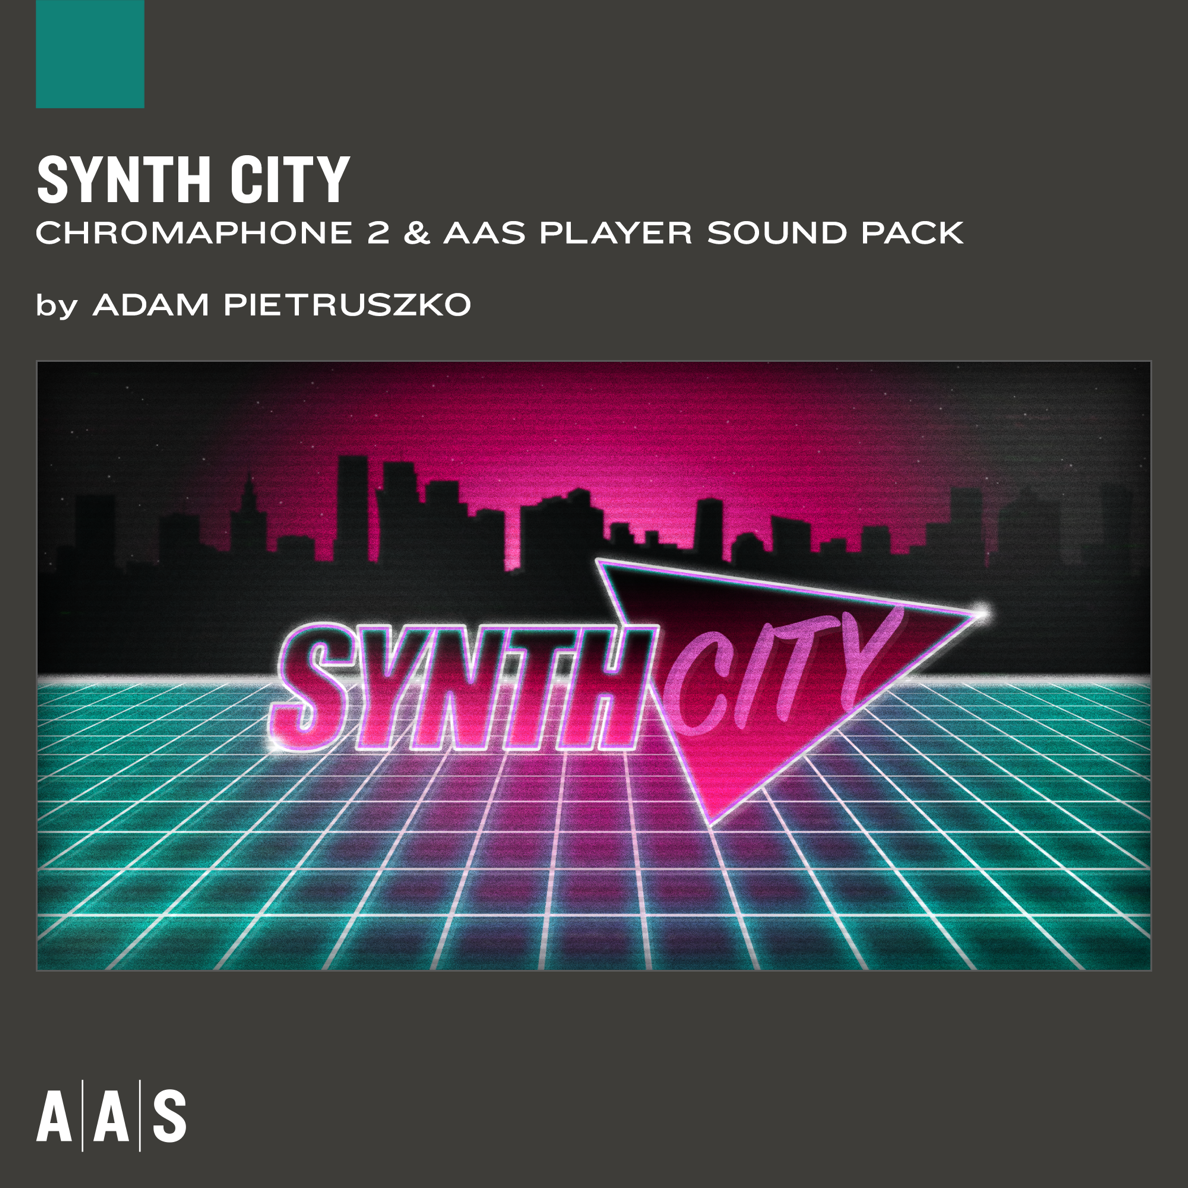 Chromaphone and AAS Player sound pack ： Synth City